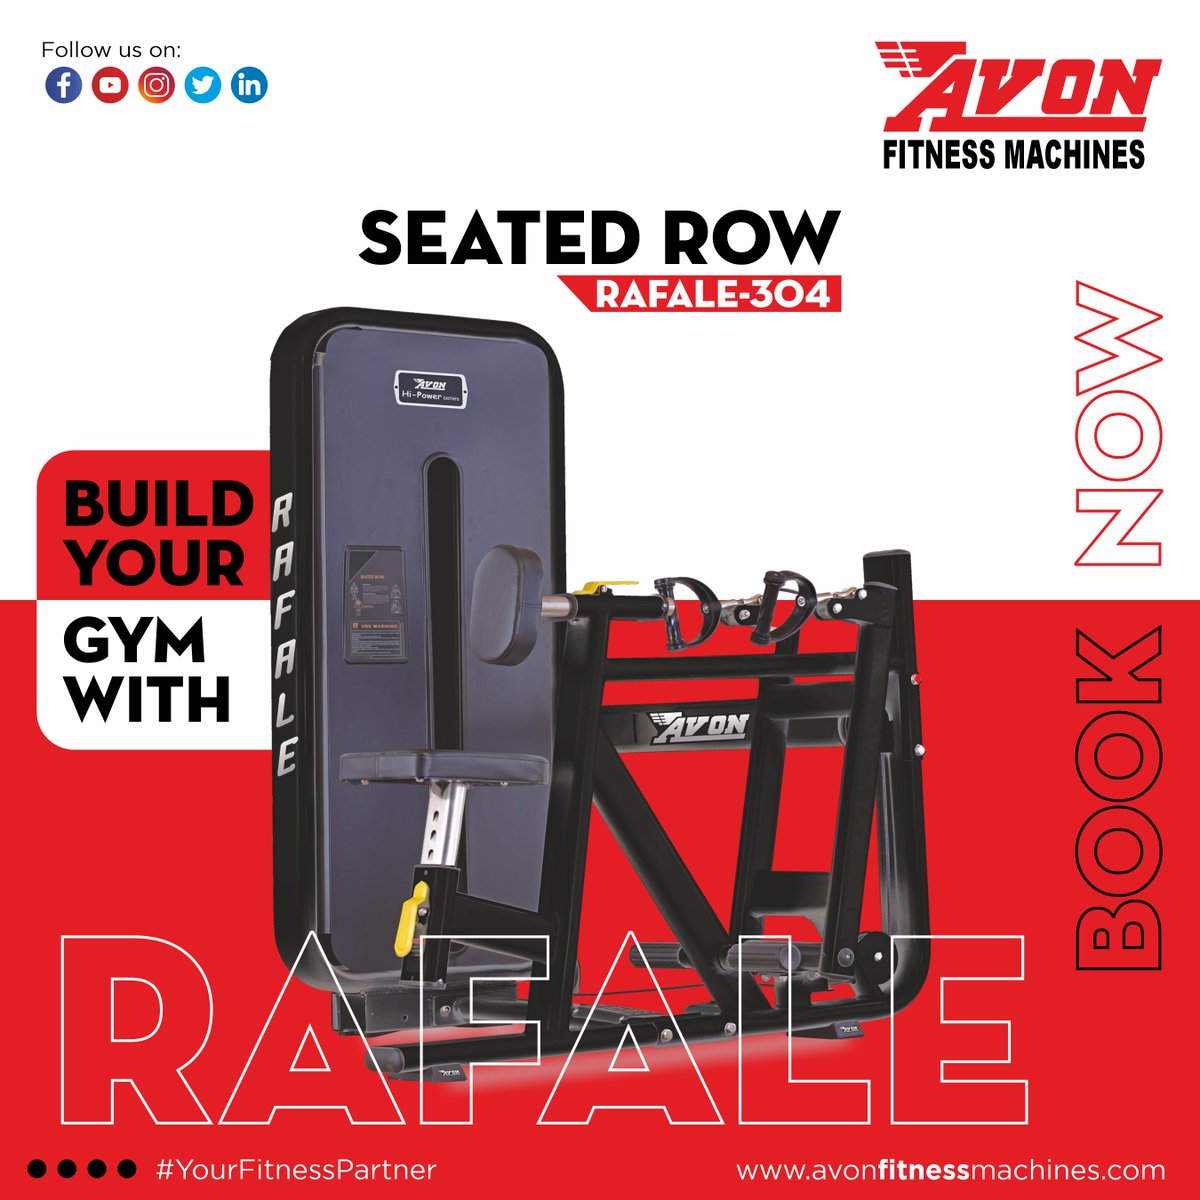 Upgrade your gym with high quality fitness equipments for safety and better experience by Avon Fitness. Buy Avon Fitness Equipment today!

#YourFitnessPartner #AvonFitness #Fitness #Avon #YourFitnesssPartner #chestpress #excercising #workoutmotivation #workoutspecialist